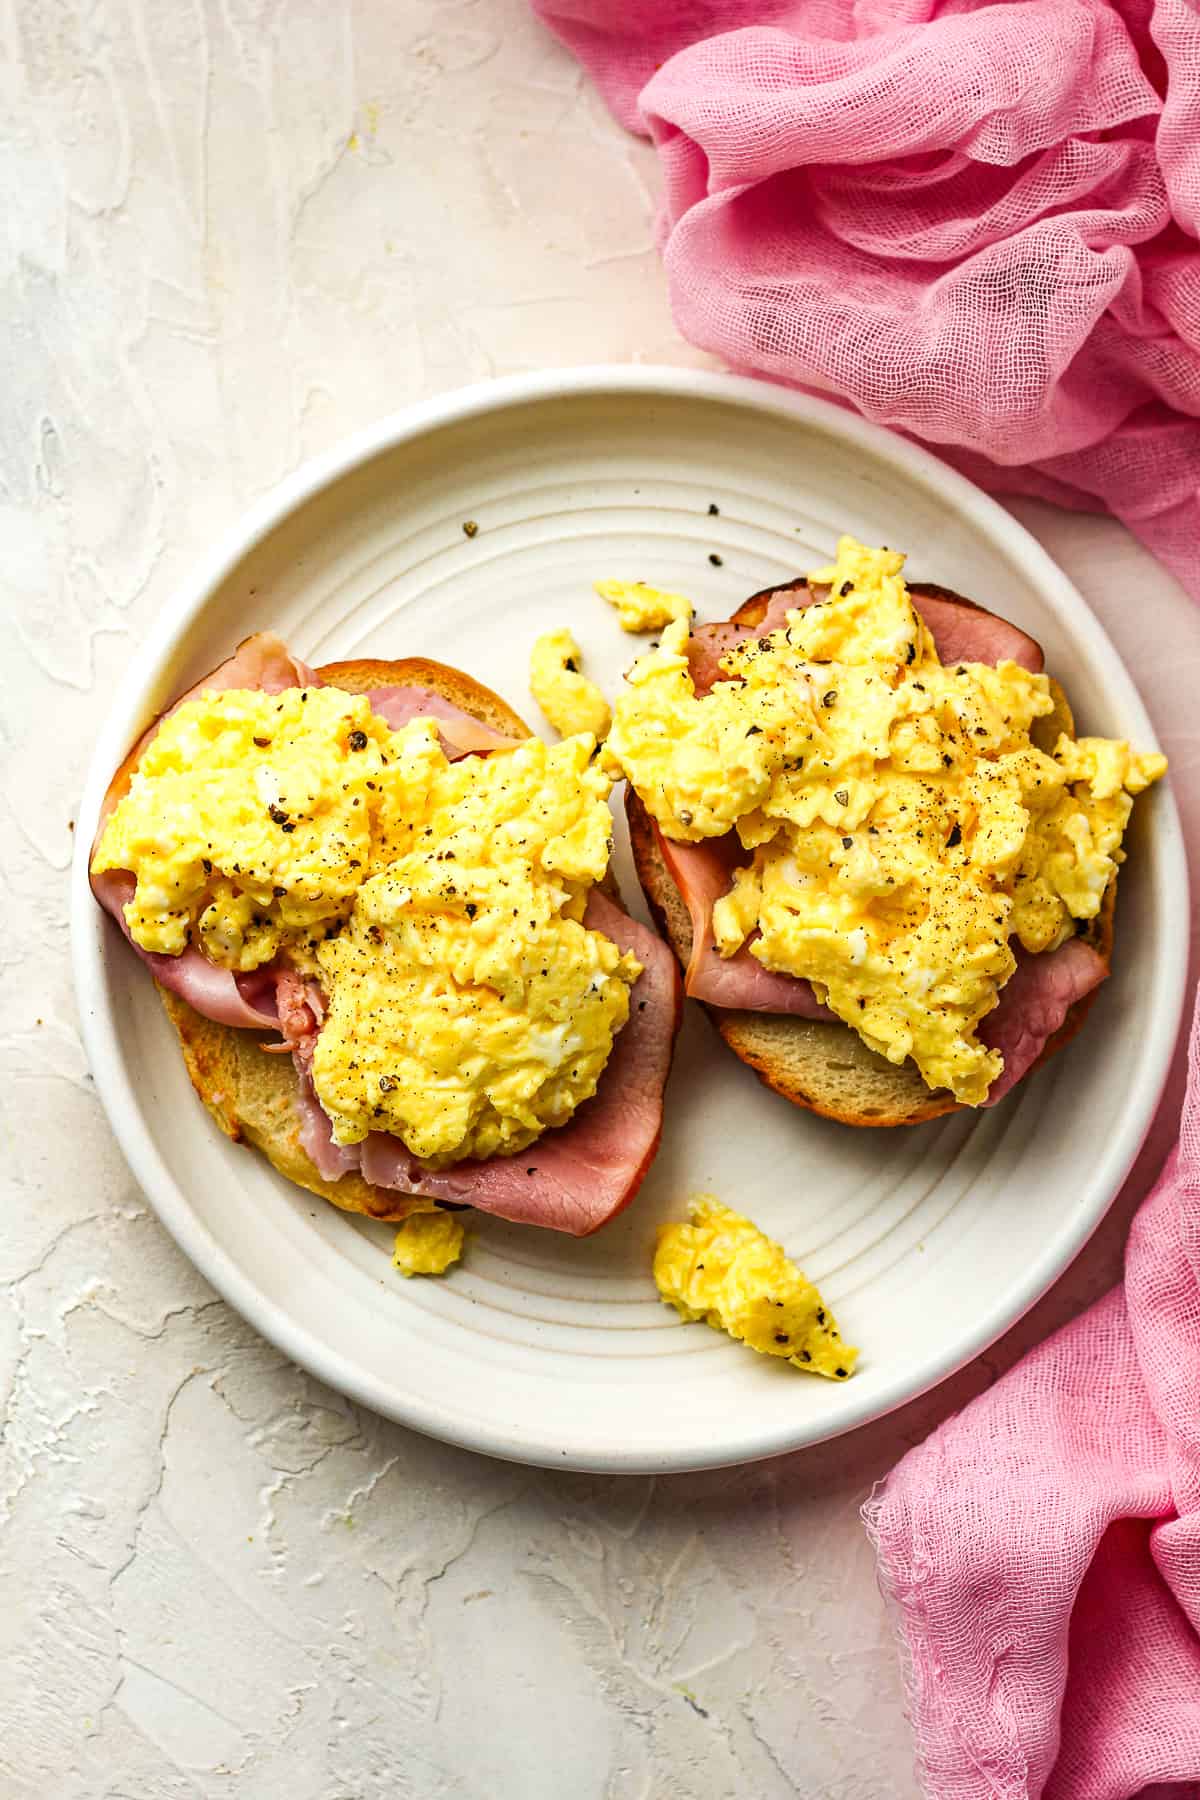 A bagel toasted and topped with ham and eggs.